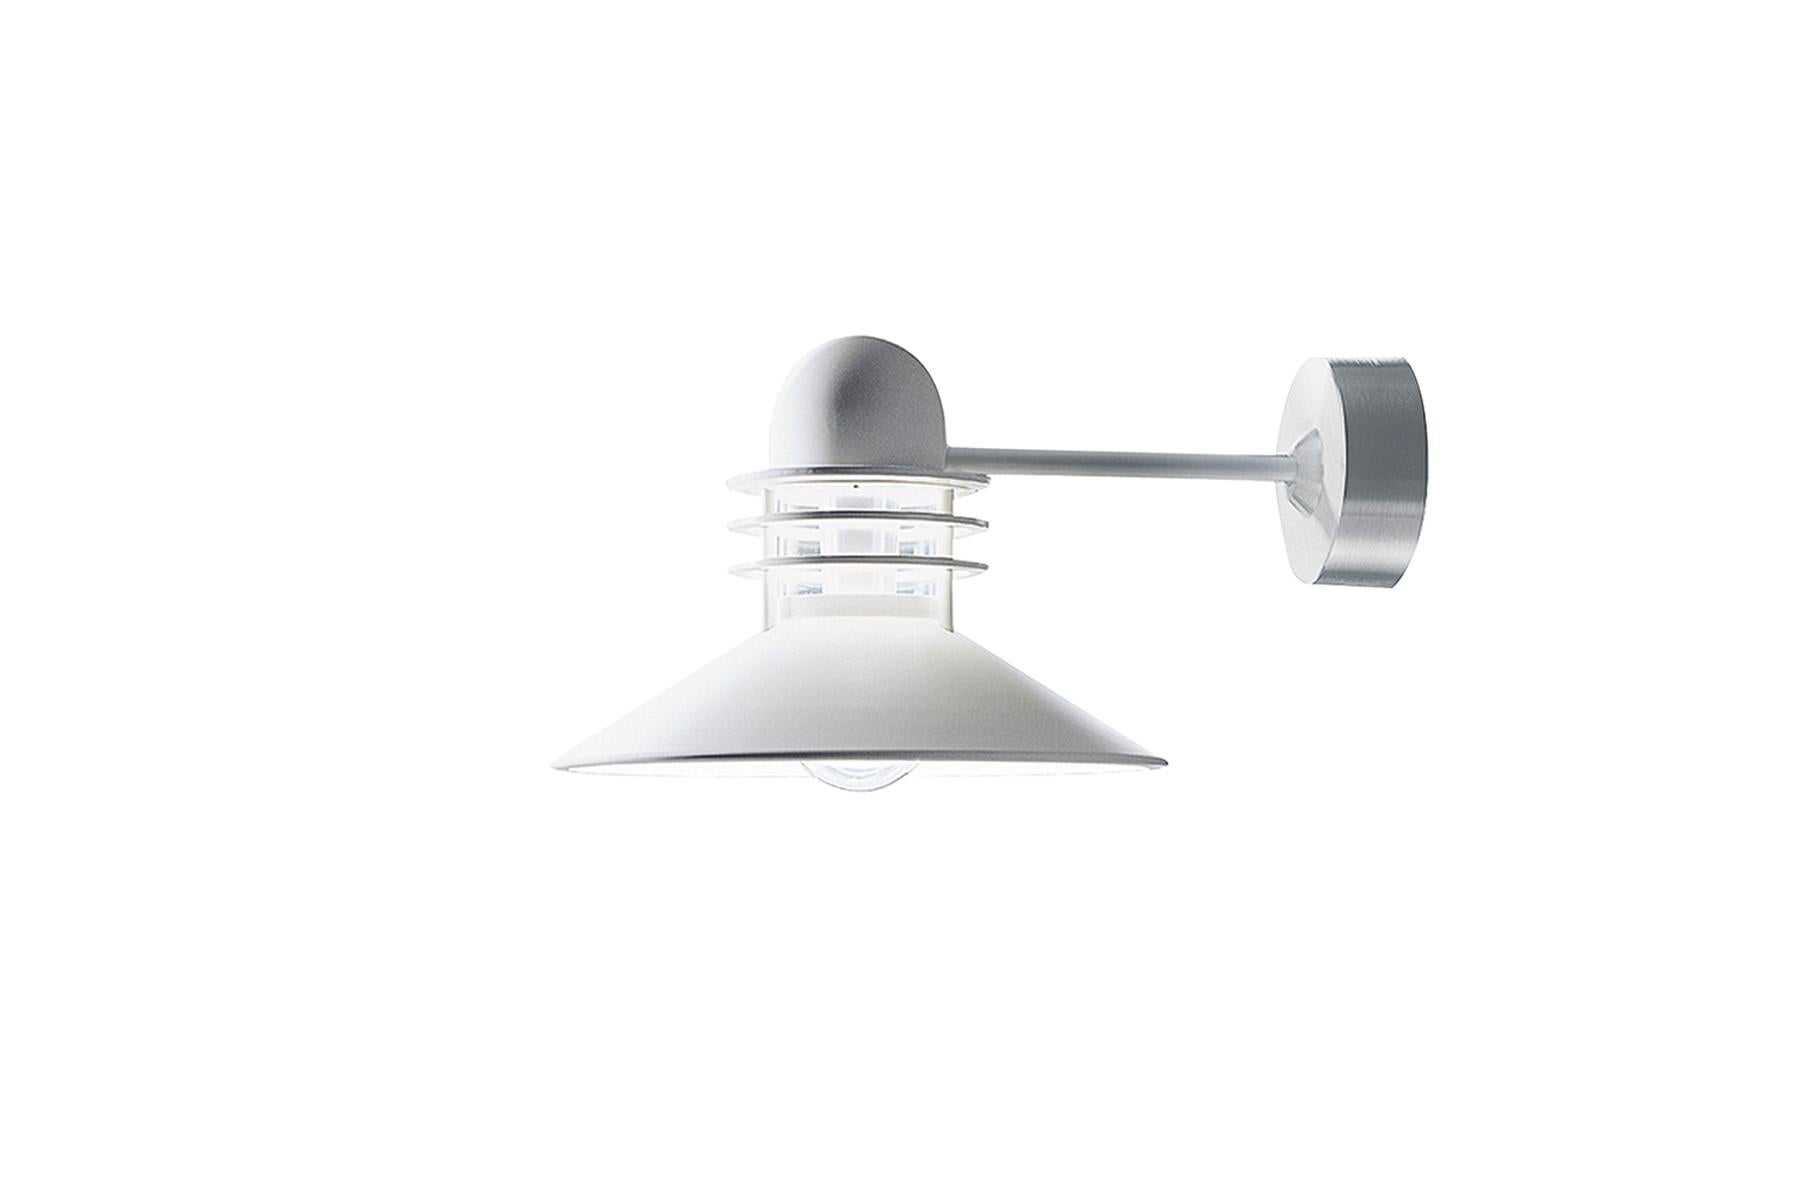 The conical shade ensures comfortable light that is directed downwards in a wide beam. The shade interior has a white matte painted surface, ensuring uniform light distribution. The rings ensure that a stray light is controlled, and direct a small